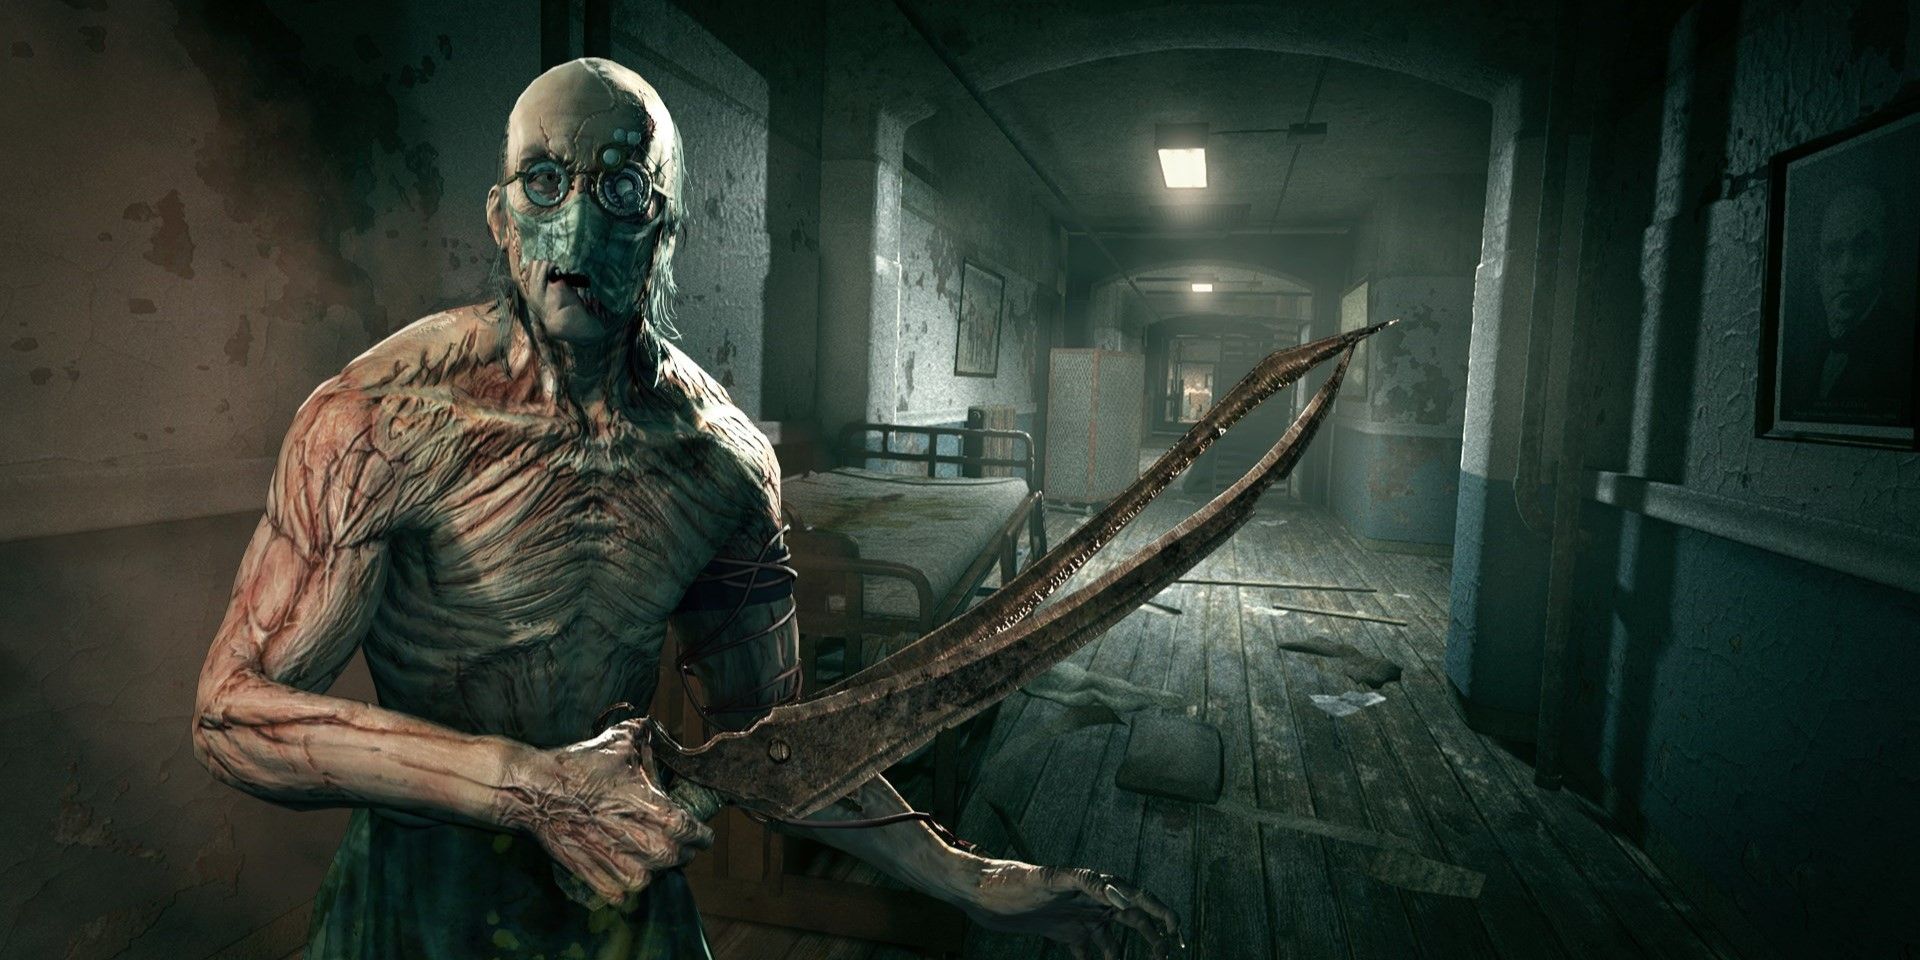 Promo art of Richard Trager from Outlast